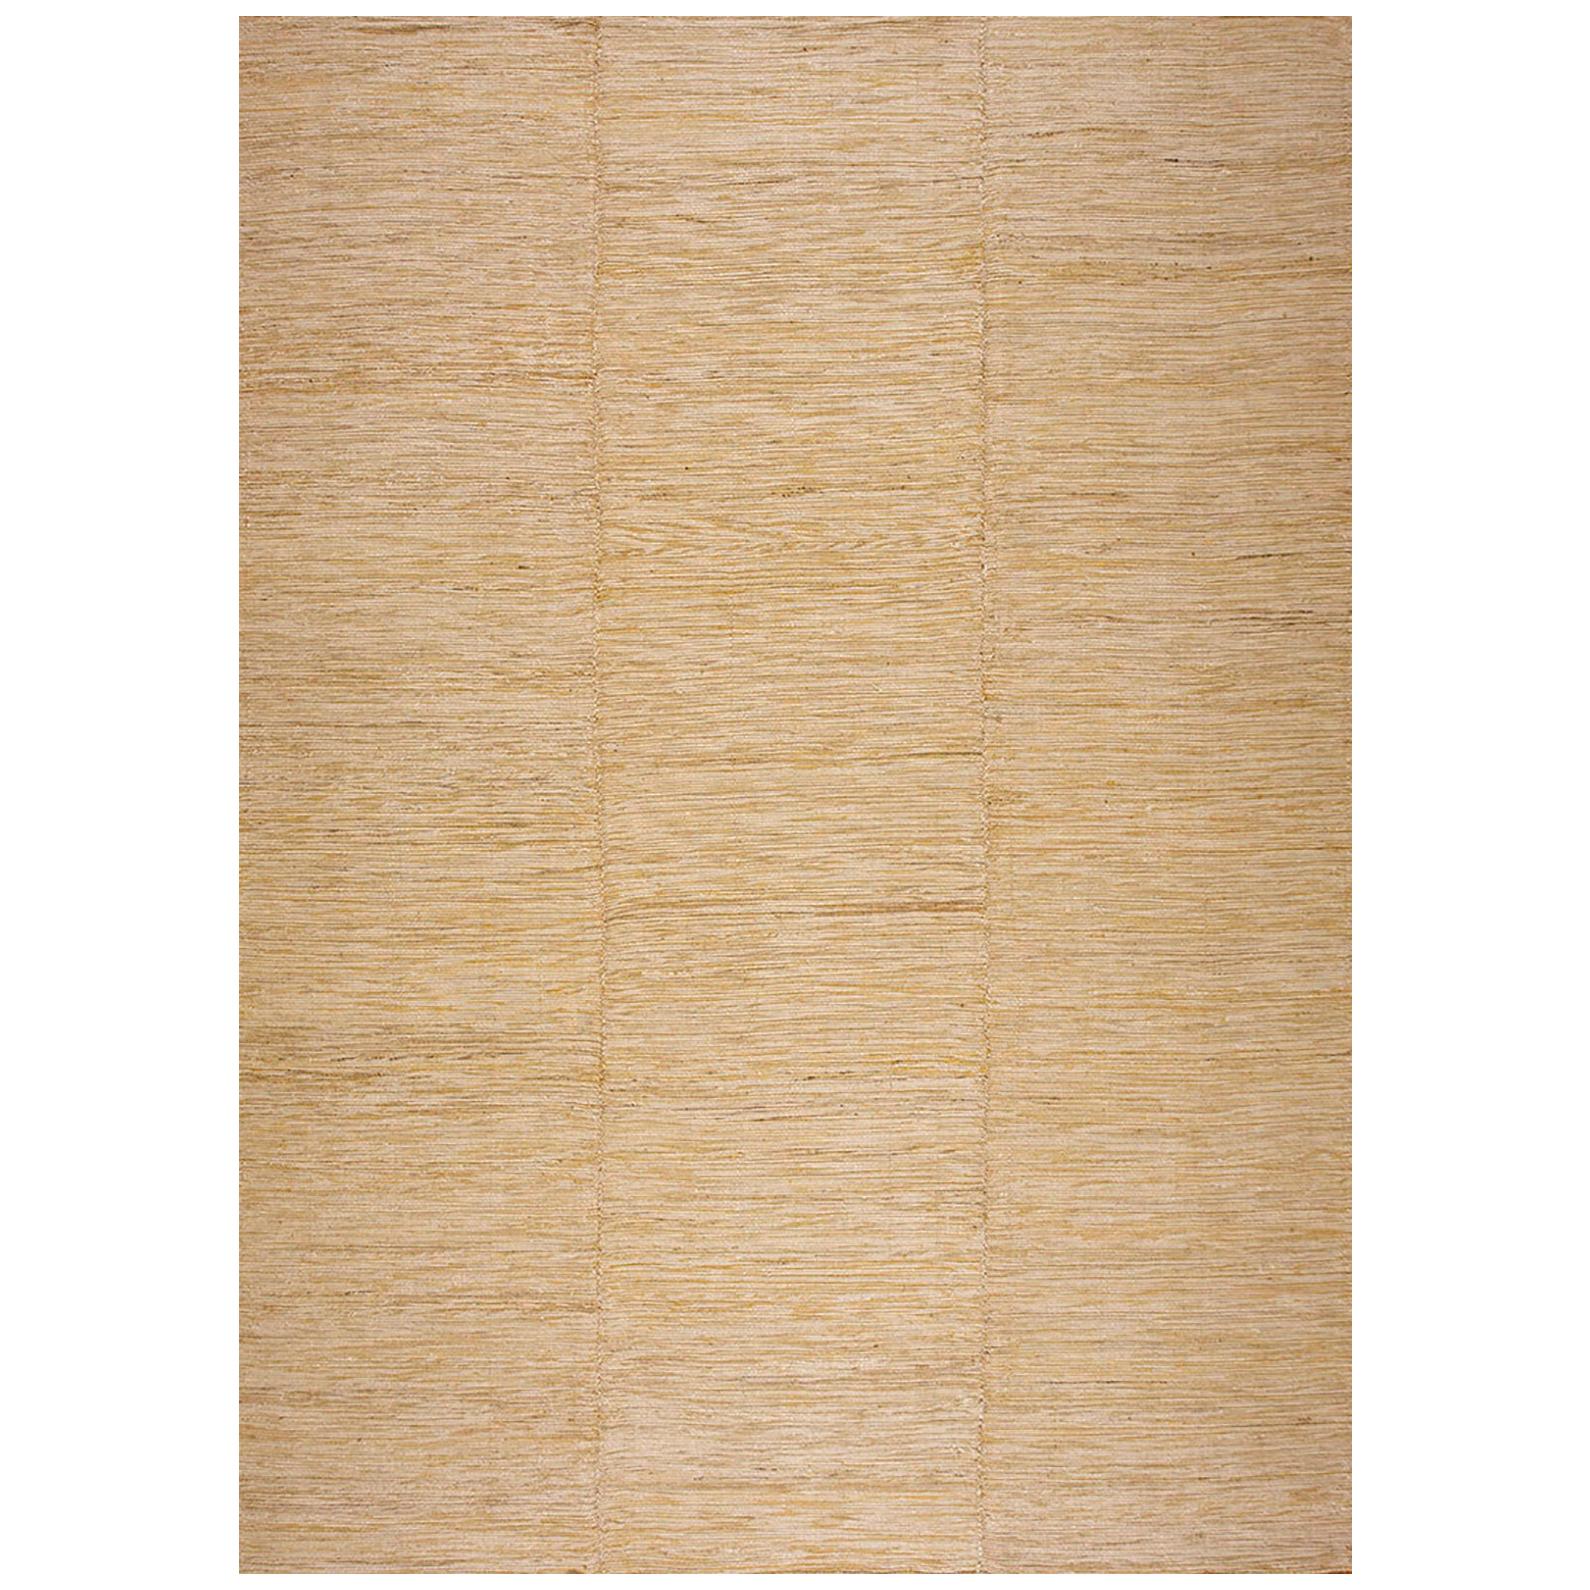 Contemporary Shaker Style Flat-Weave Carpet ( 9' 3" x 12' 4" - 282 x 376 cm ) For Sale